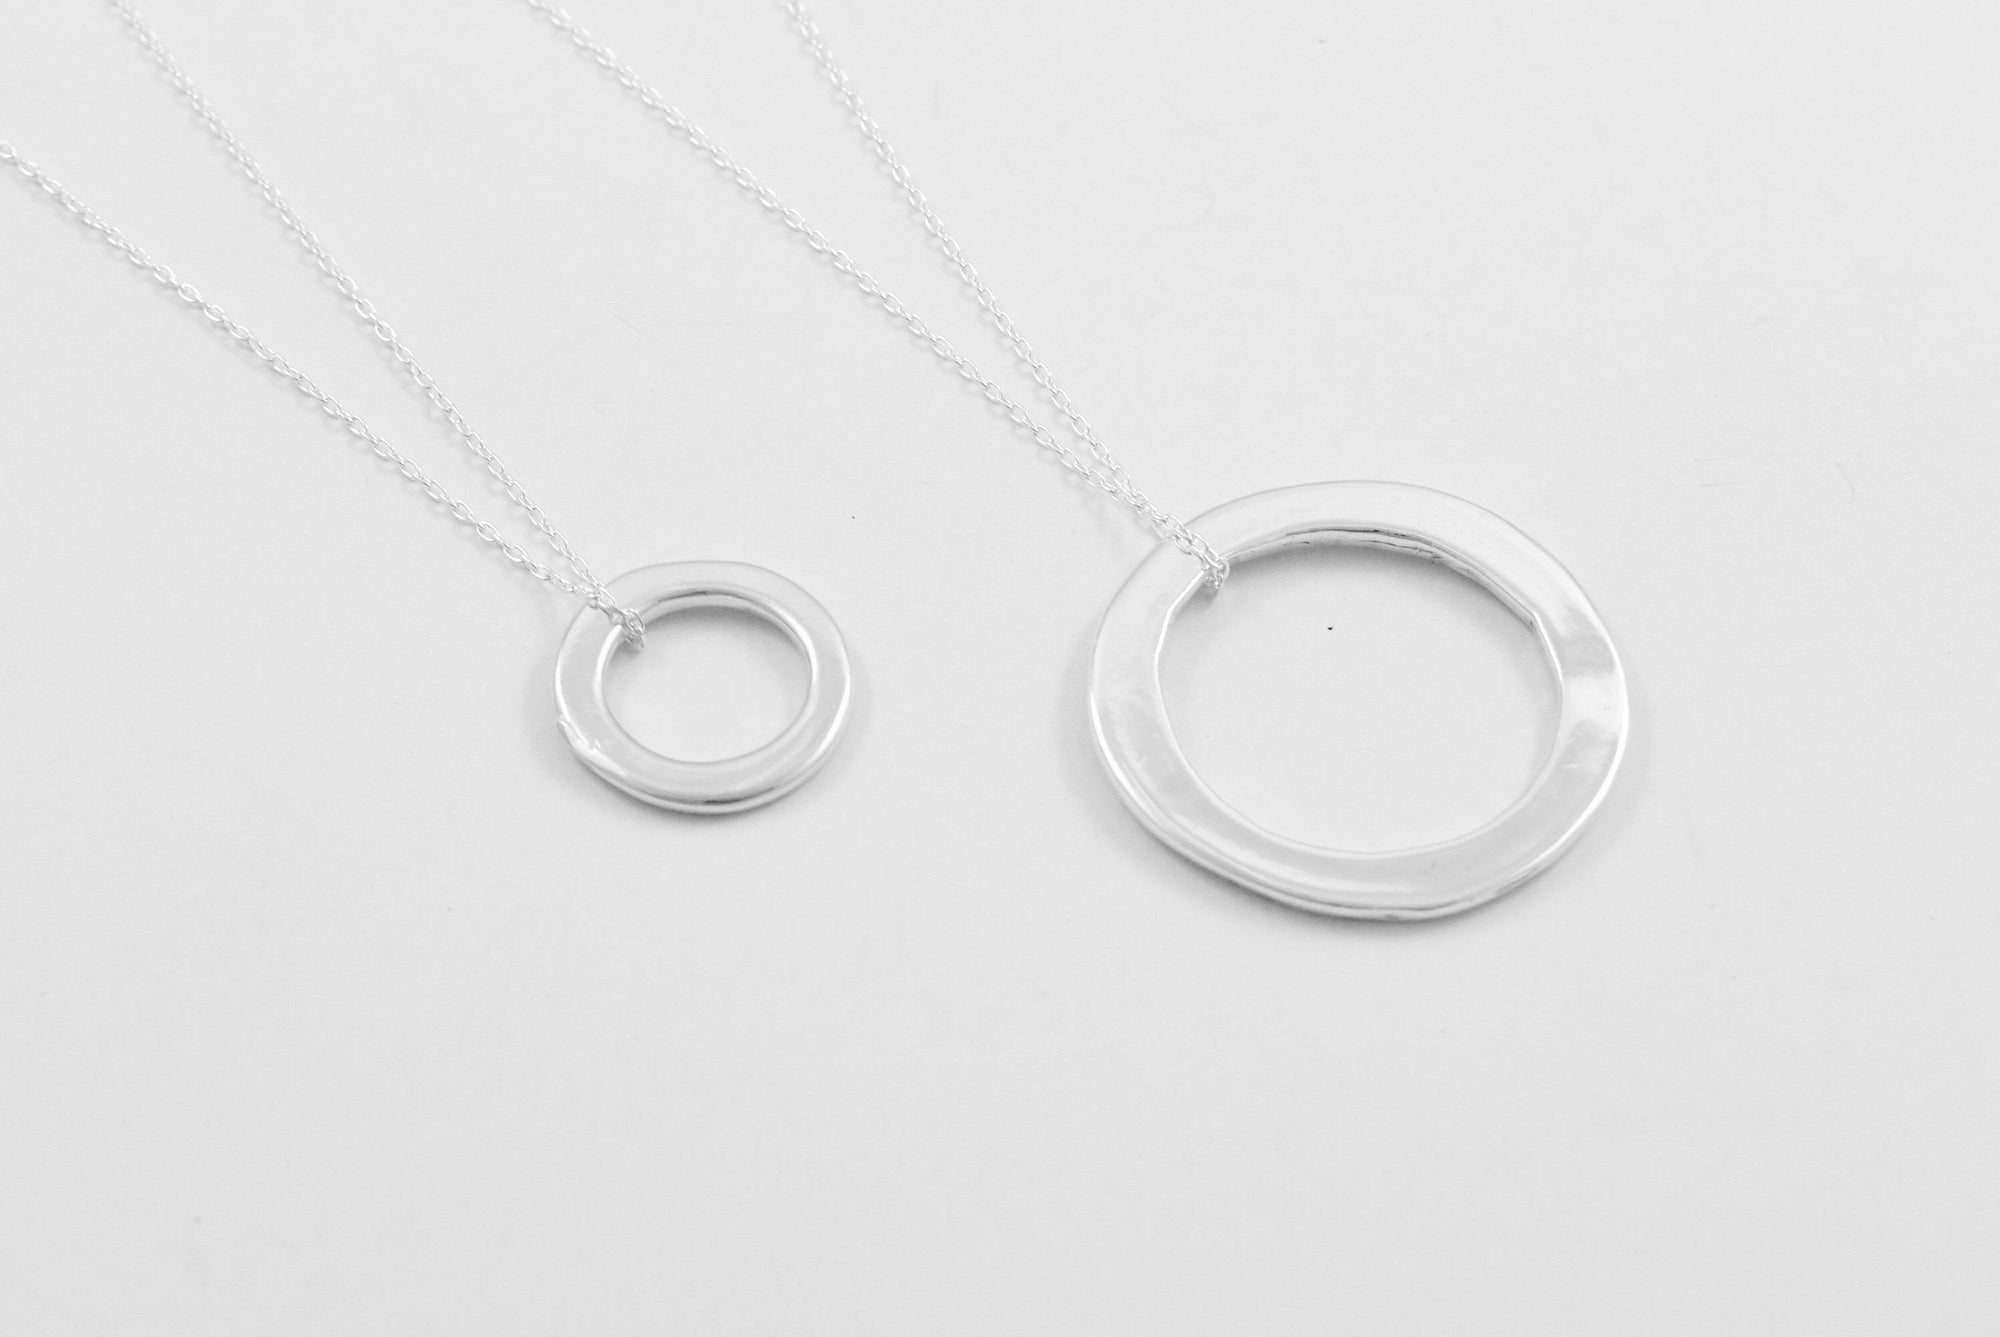 Both sizes of the Ina necklace lain flat to show the relative size difference between them, as well as the clever way the chain is attached.